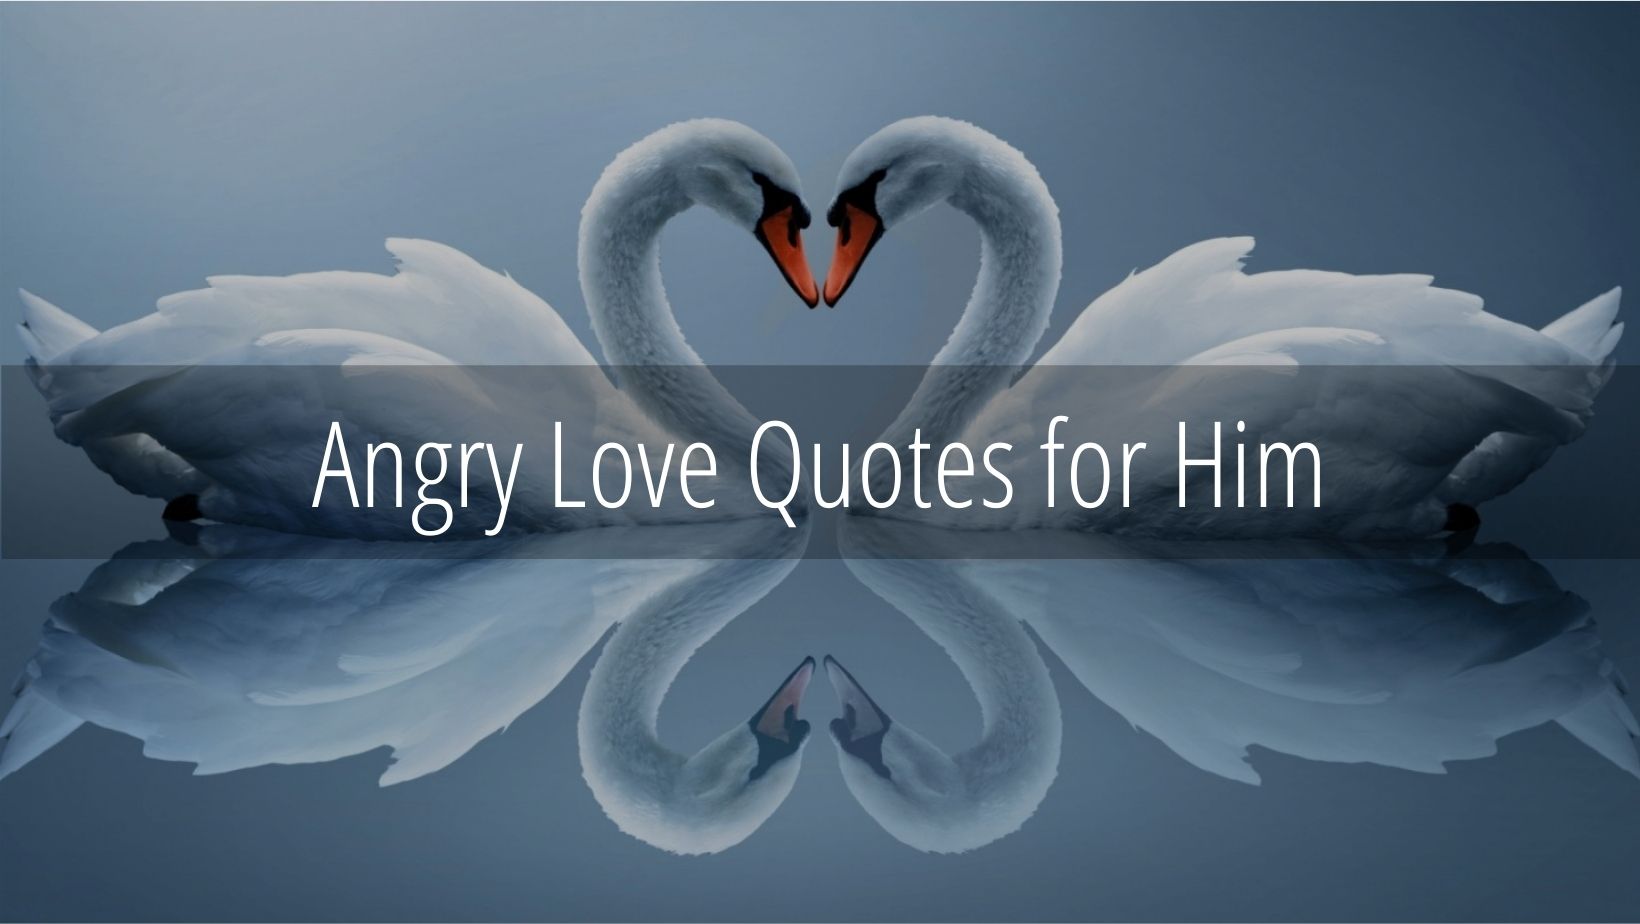 Angry Love Quotes for Him